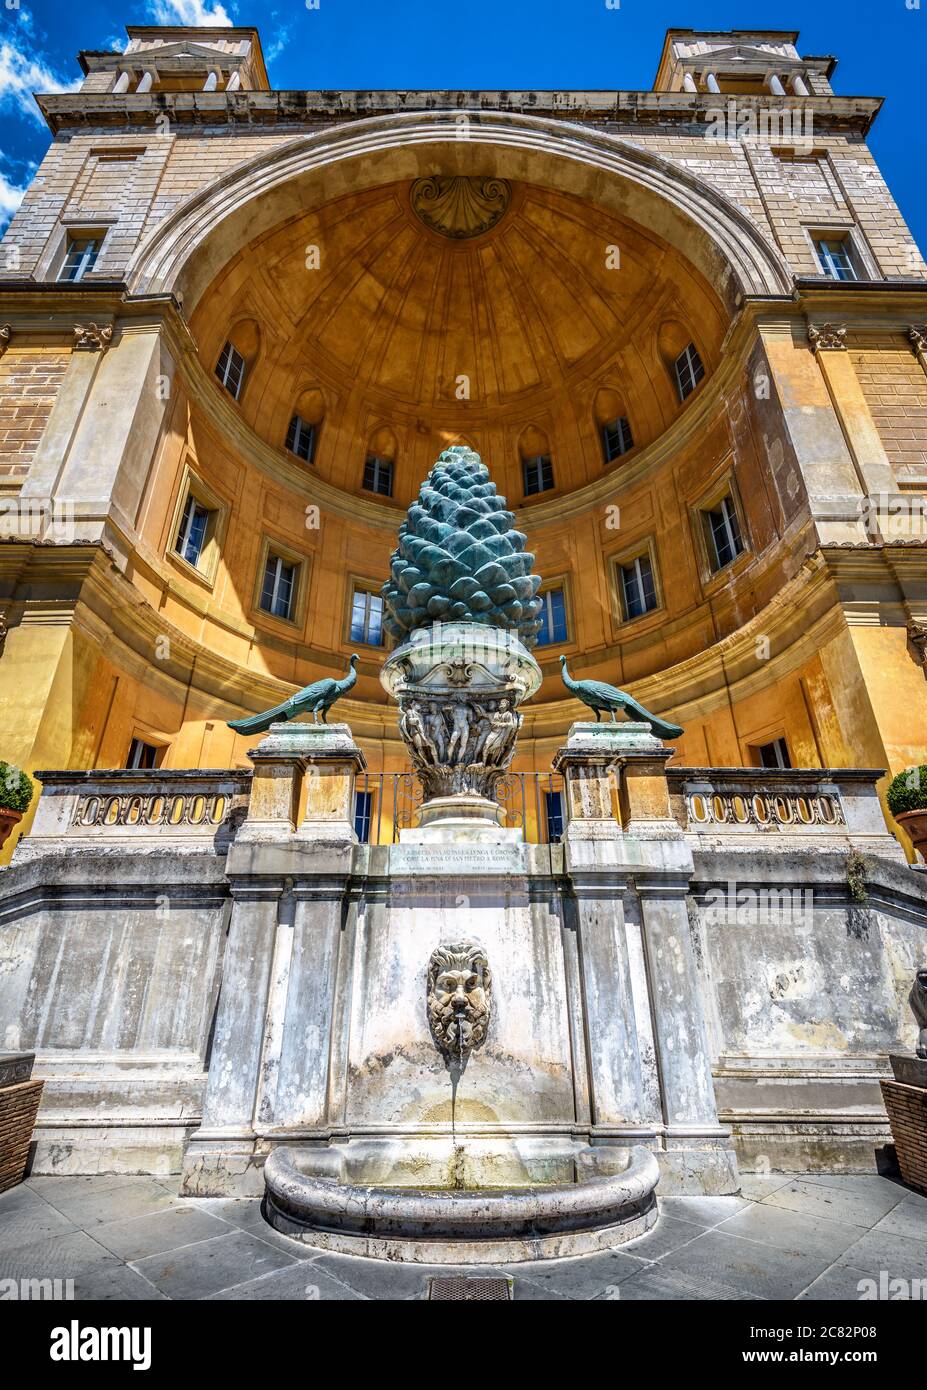 Fontana della Pigna or Pine Cone fountain in Belvedere courtyard of Vatican museums, Rome, Italy. It is landmark of Vatican City, detail of papal pala Stock Photo